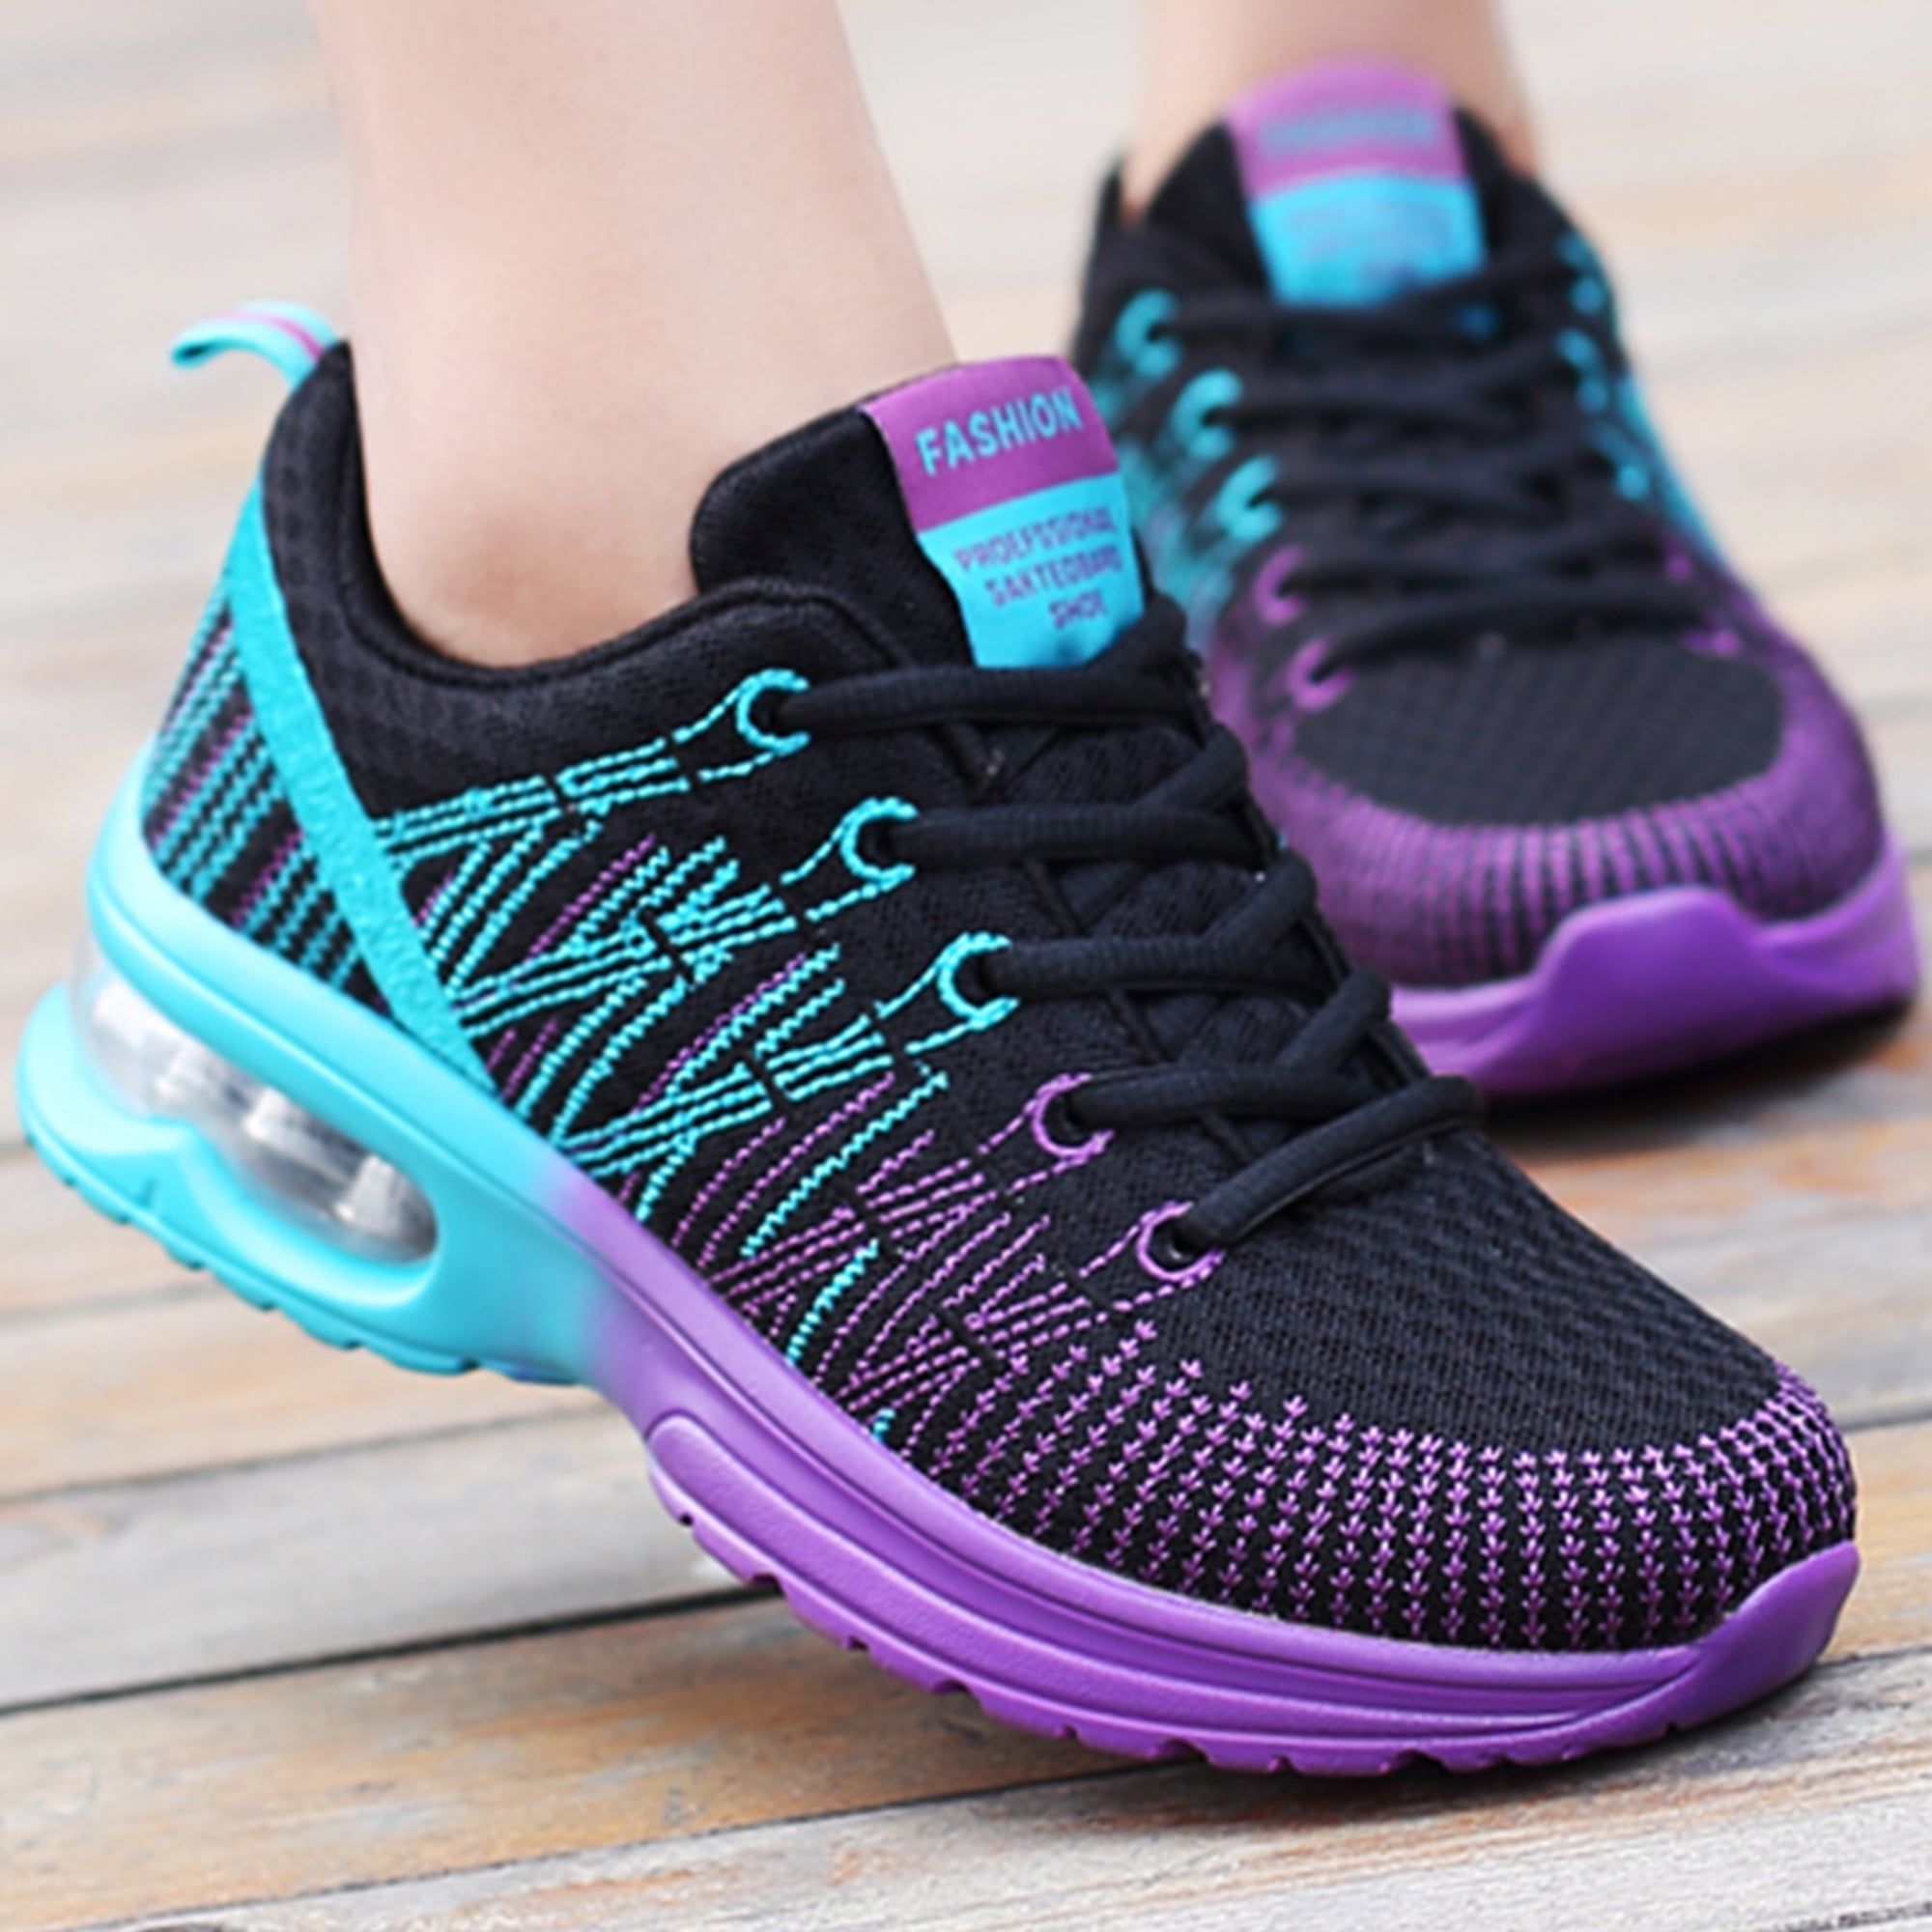 REUR RO RO Fashion Sneakers for Women Lightweight Athletic Sport Shoes ...